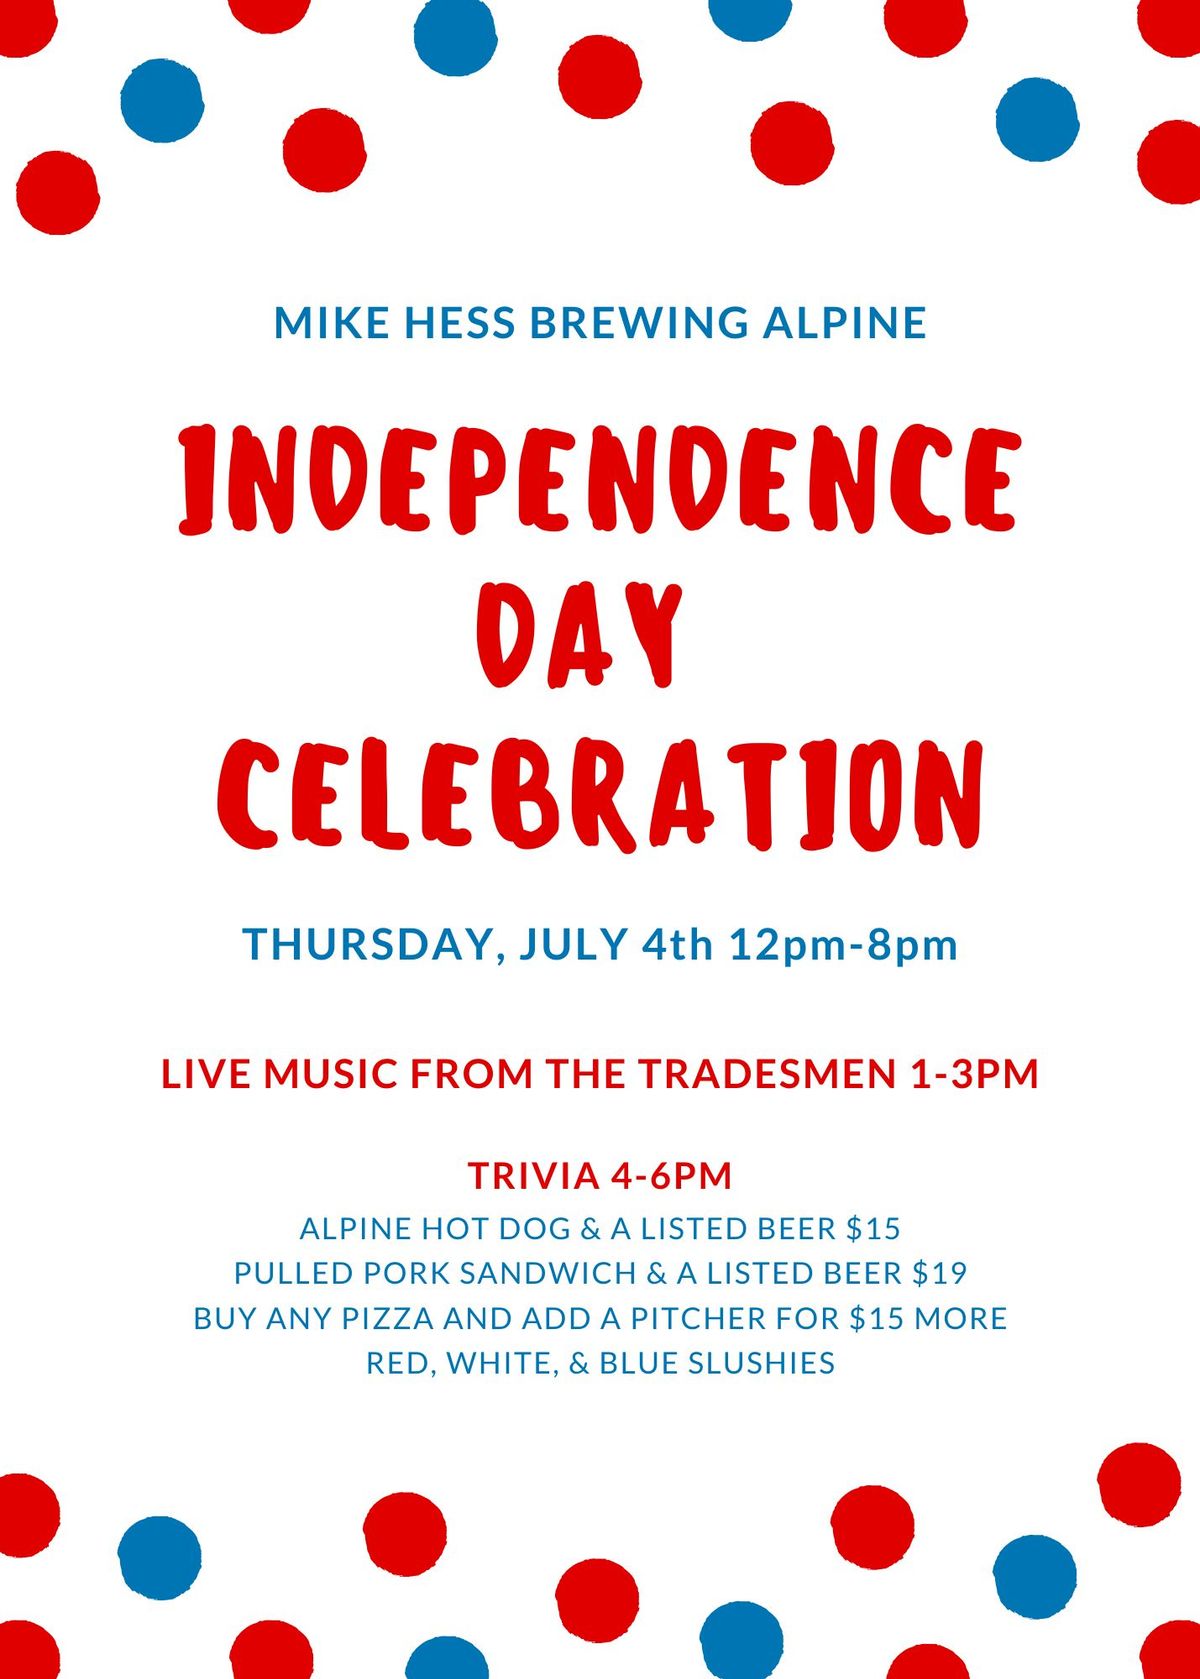 July 4th - Trivia, Music, beer and food specials